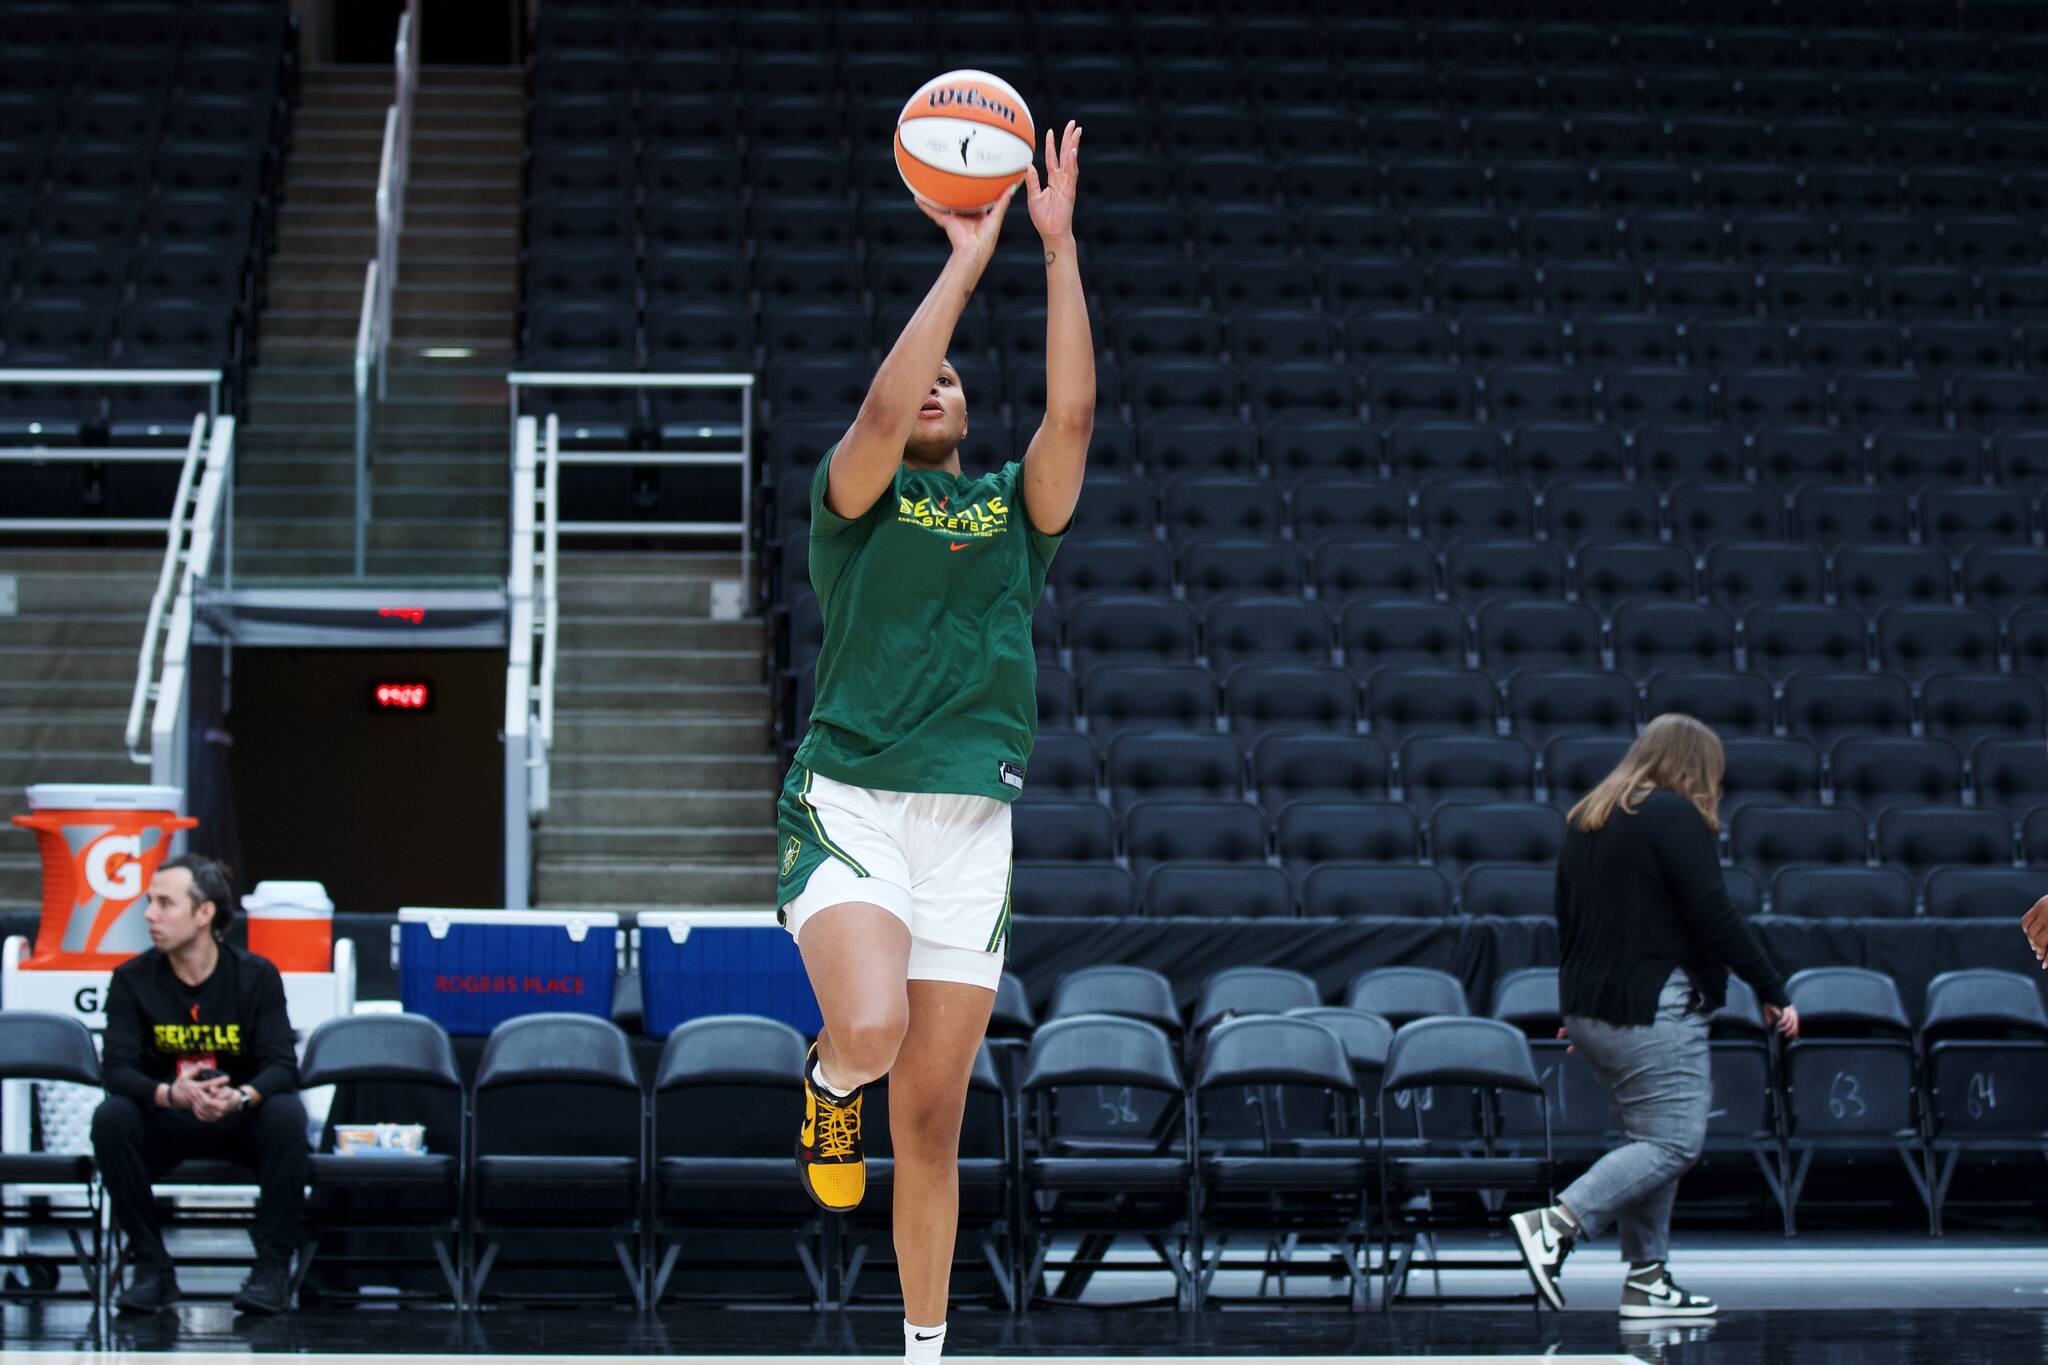 Quay Miller taking a shot during warmups in Canada. Photo provided by Seattle Storm.